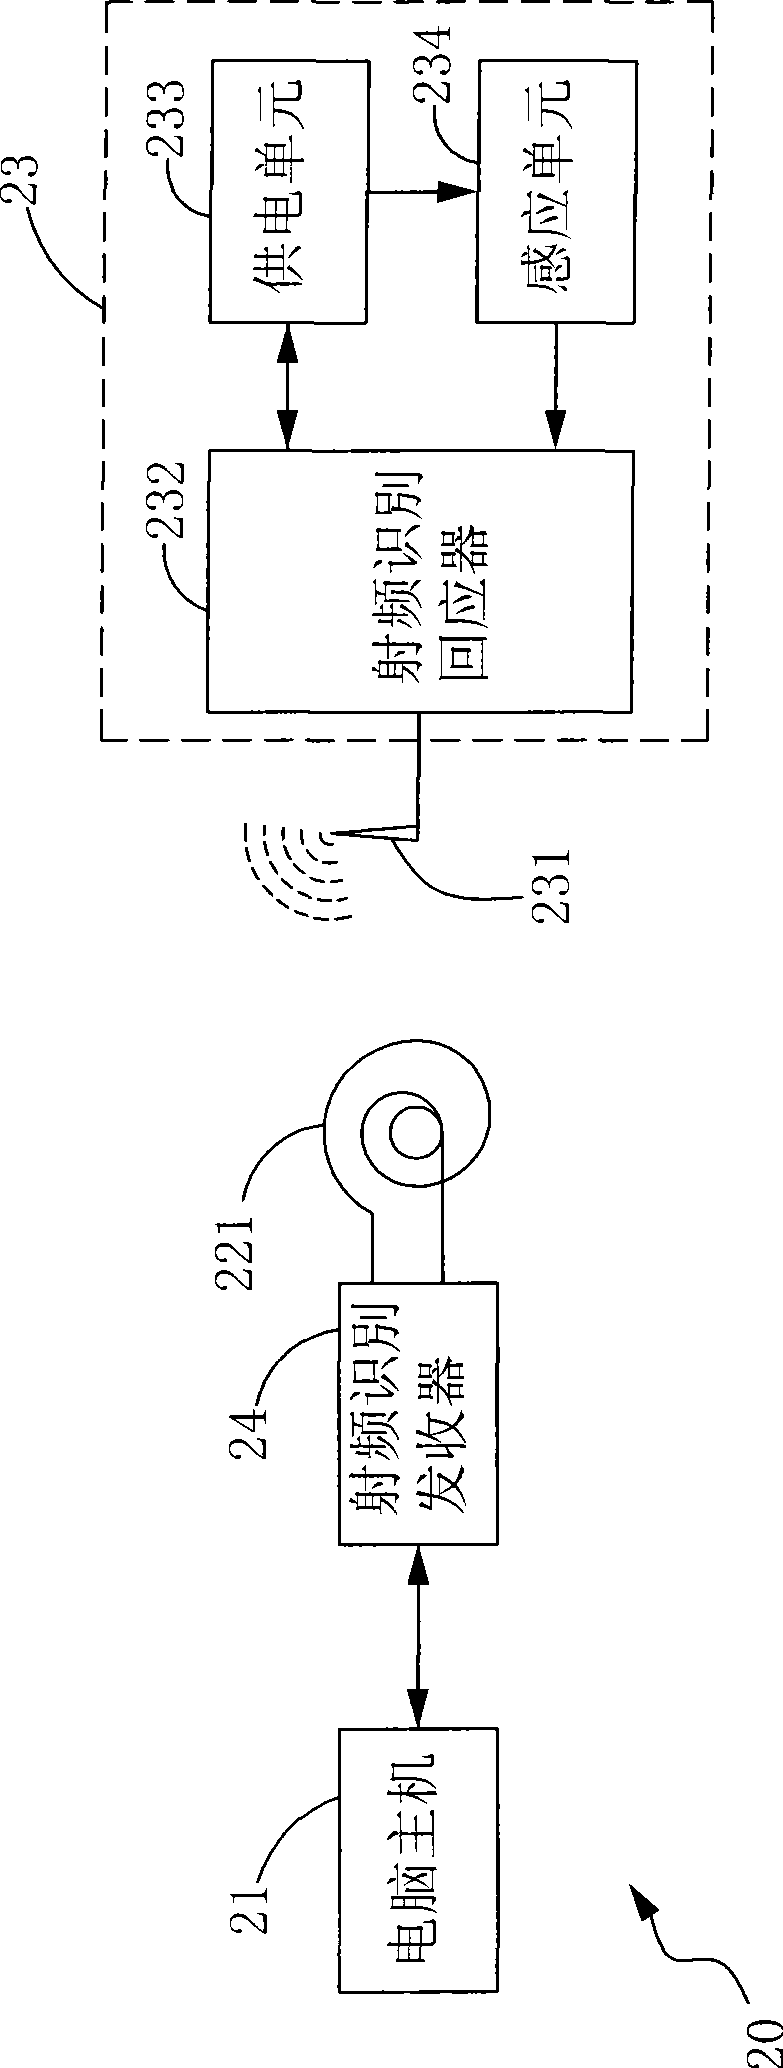 Electricity-saving wireless input apparatus and system